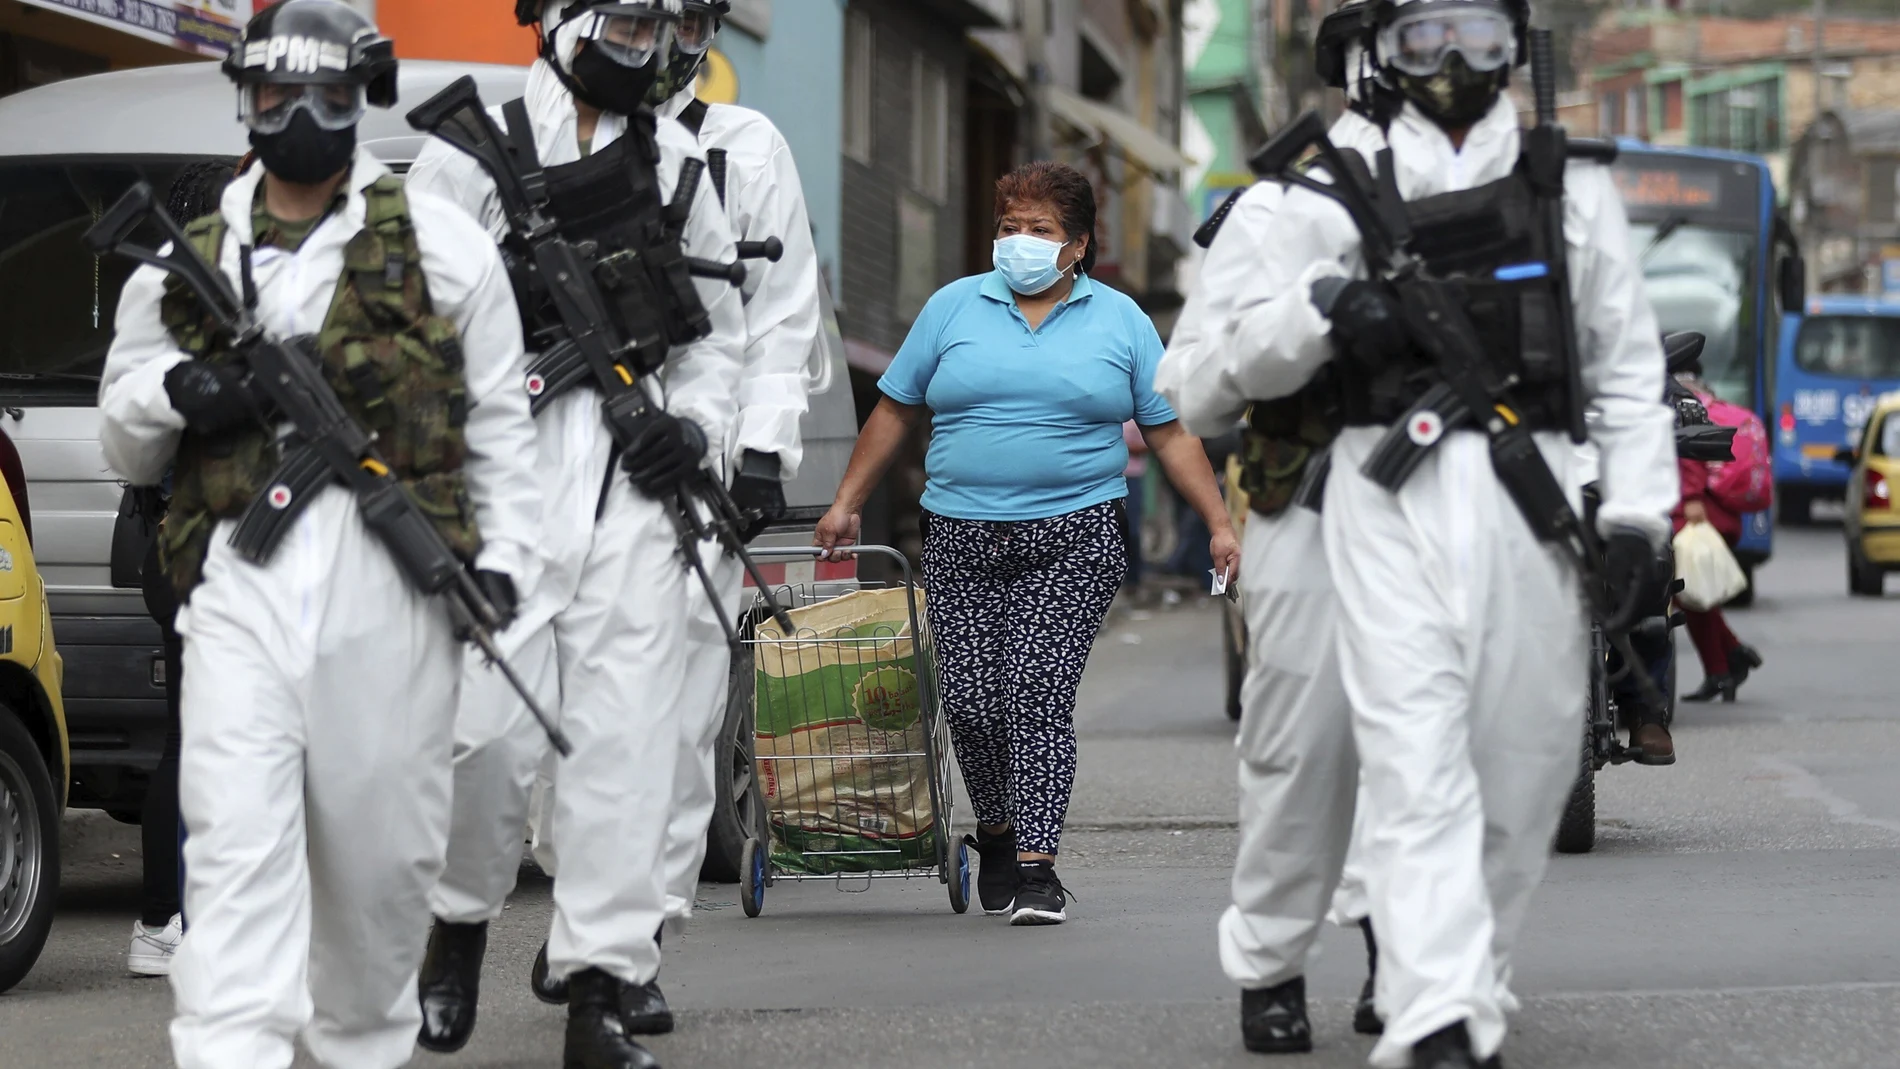 Soldiers in protective gear amid the COVID-19 pandemic patrol in Ciudad Bolivar, an area with high cases of the new coronavirus in Bogota, Colombia, Monday, July 13, 2020. The mayor of Bogota ordered tight restrictions in areas seeing the highest contagion. (AP Photo/Fernando Vergara)